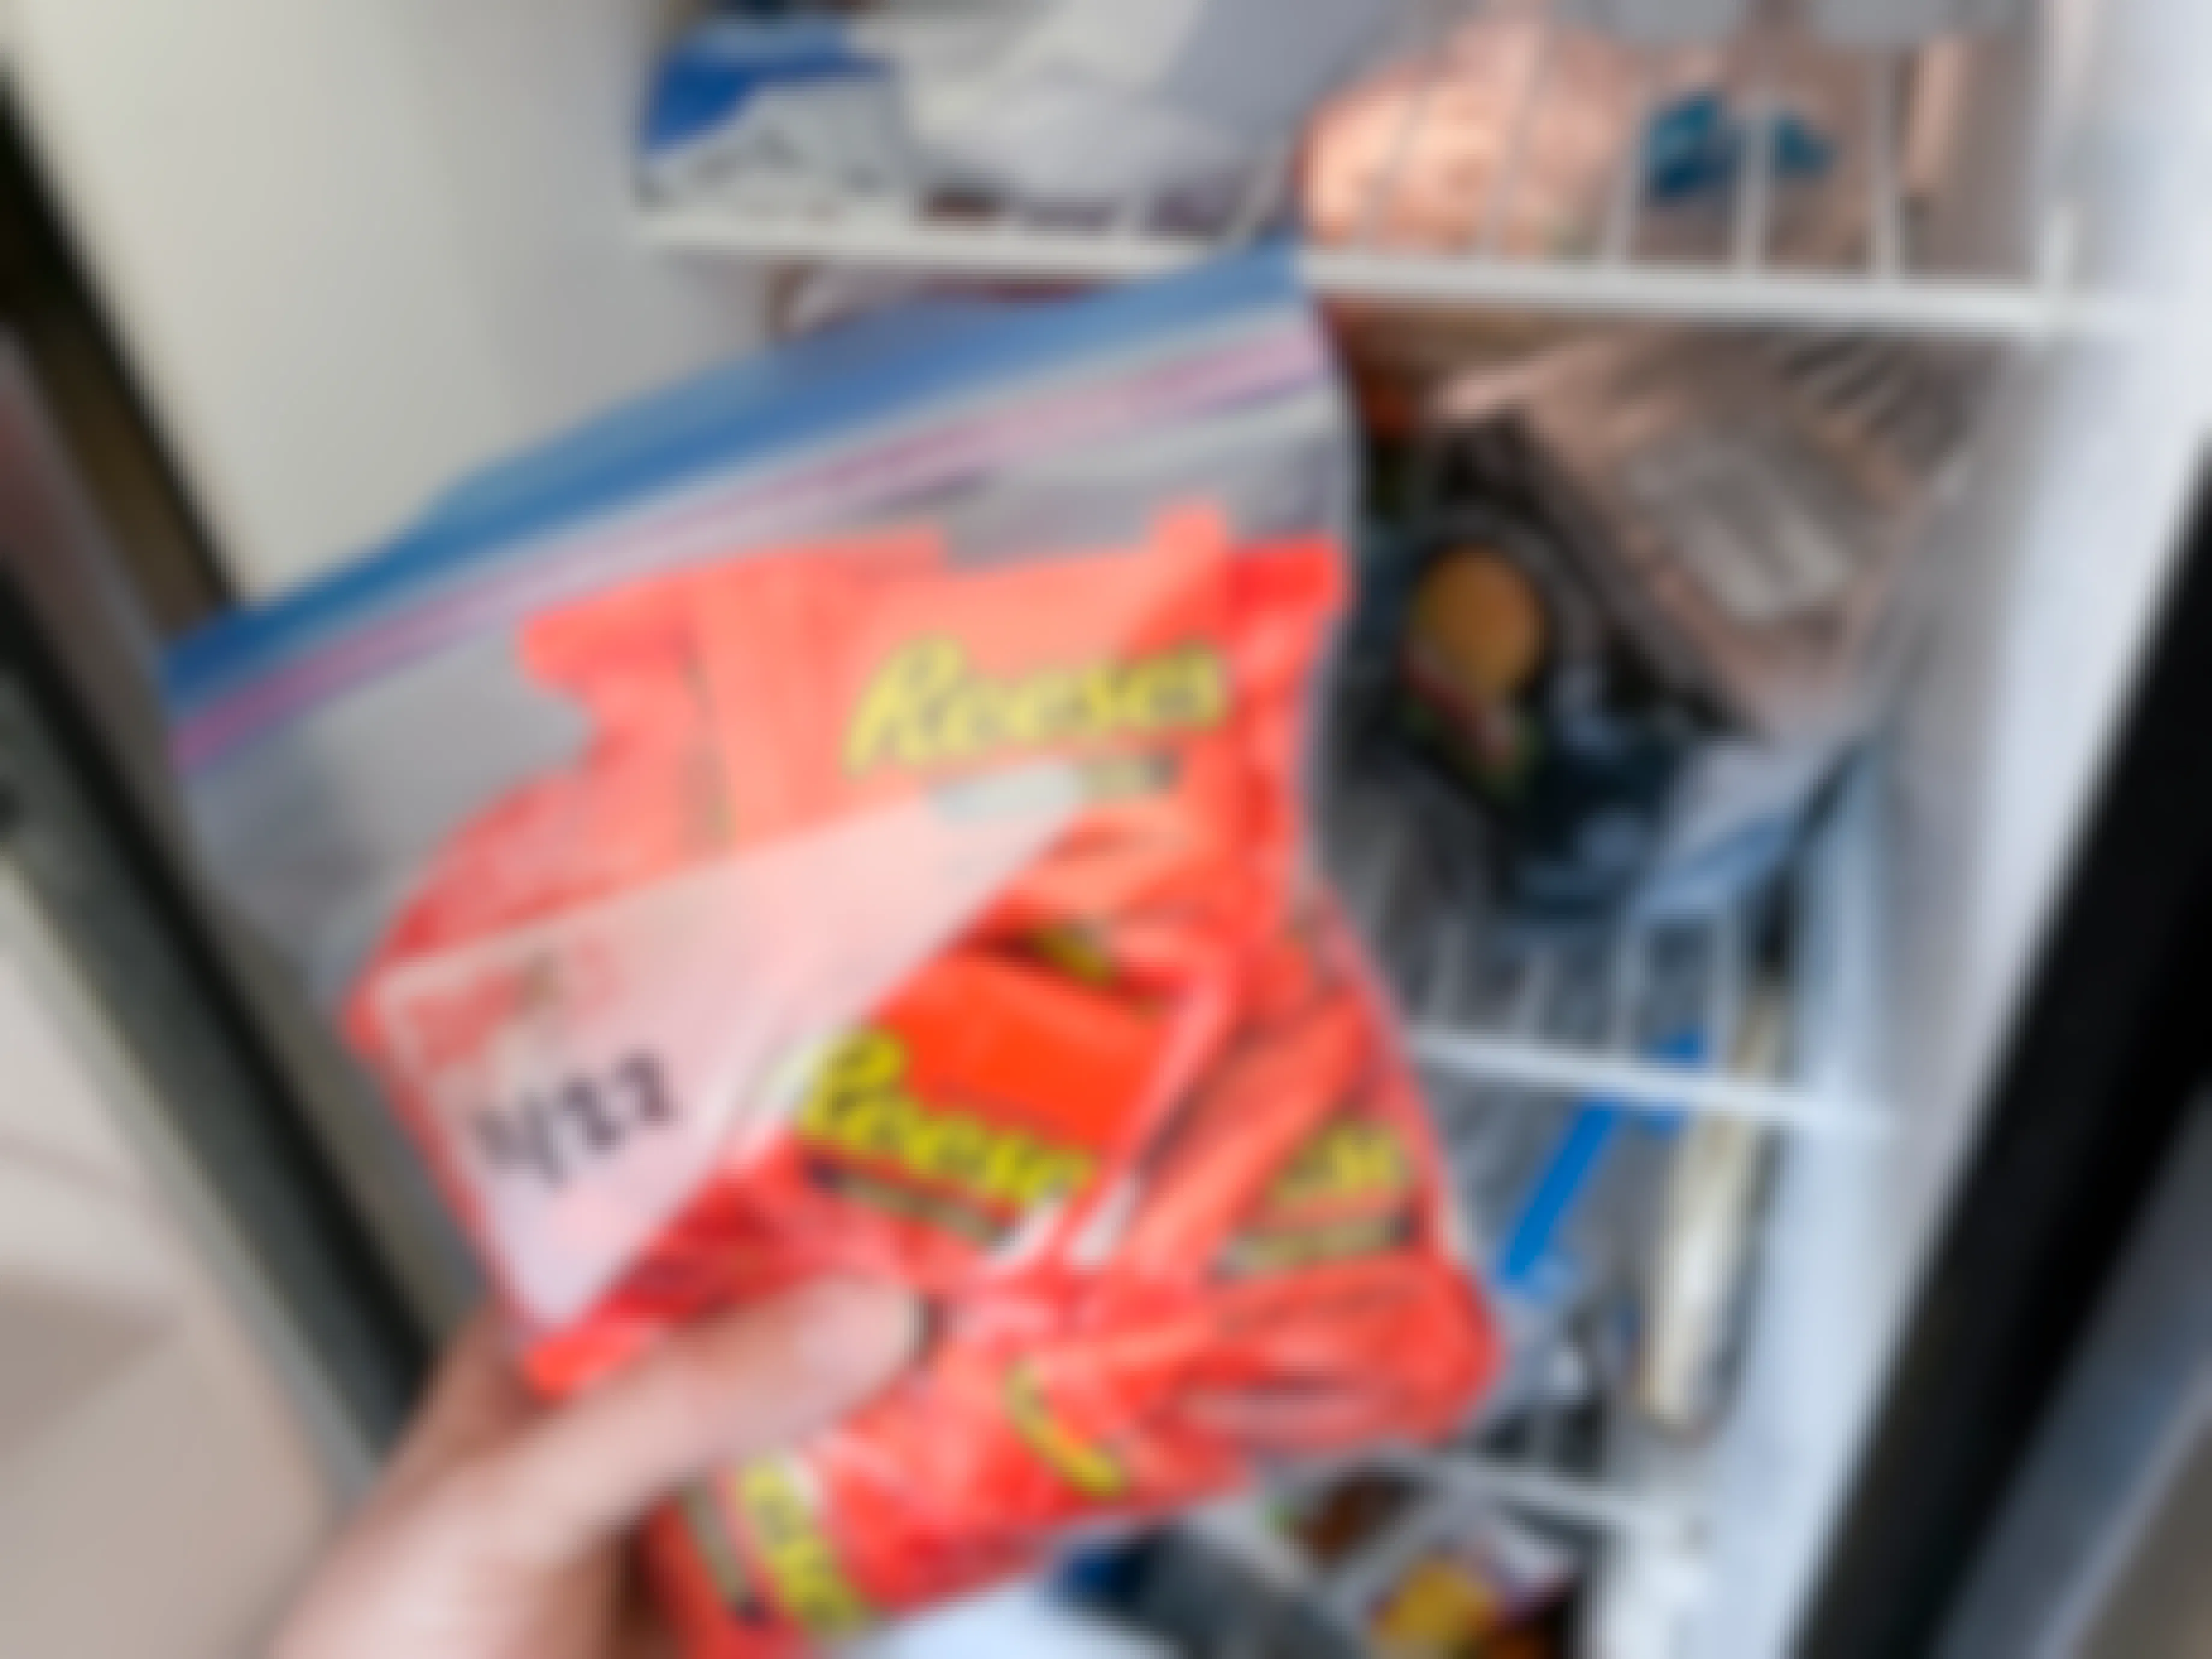 A person putting a Ziploc bag of leftover Halloween candy into their freezer.